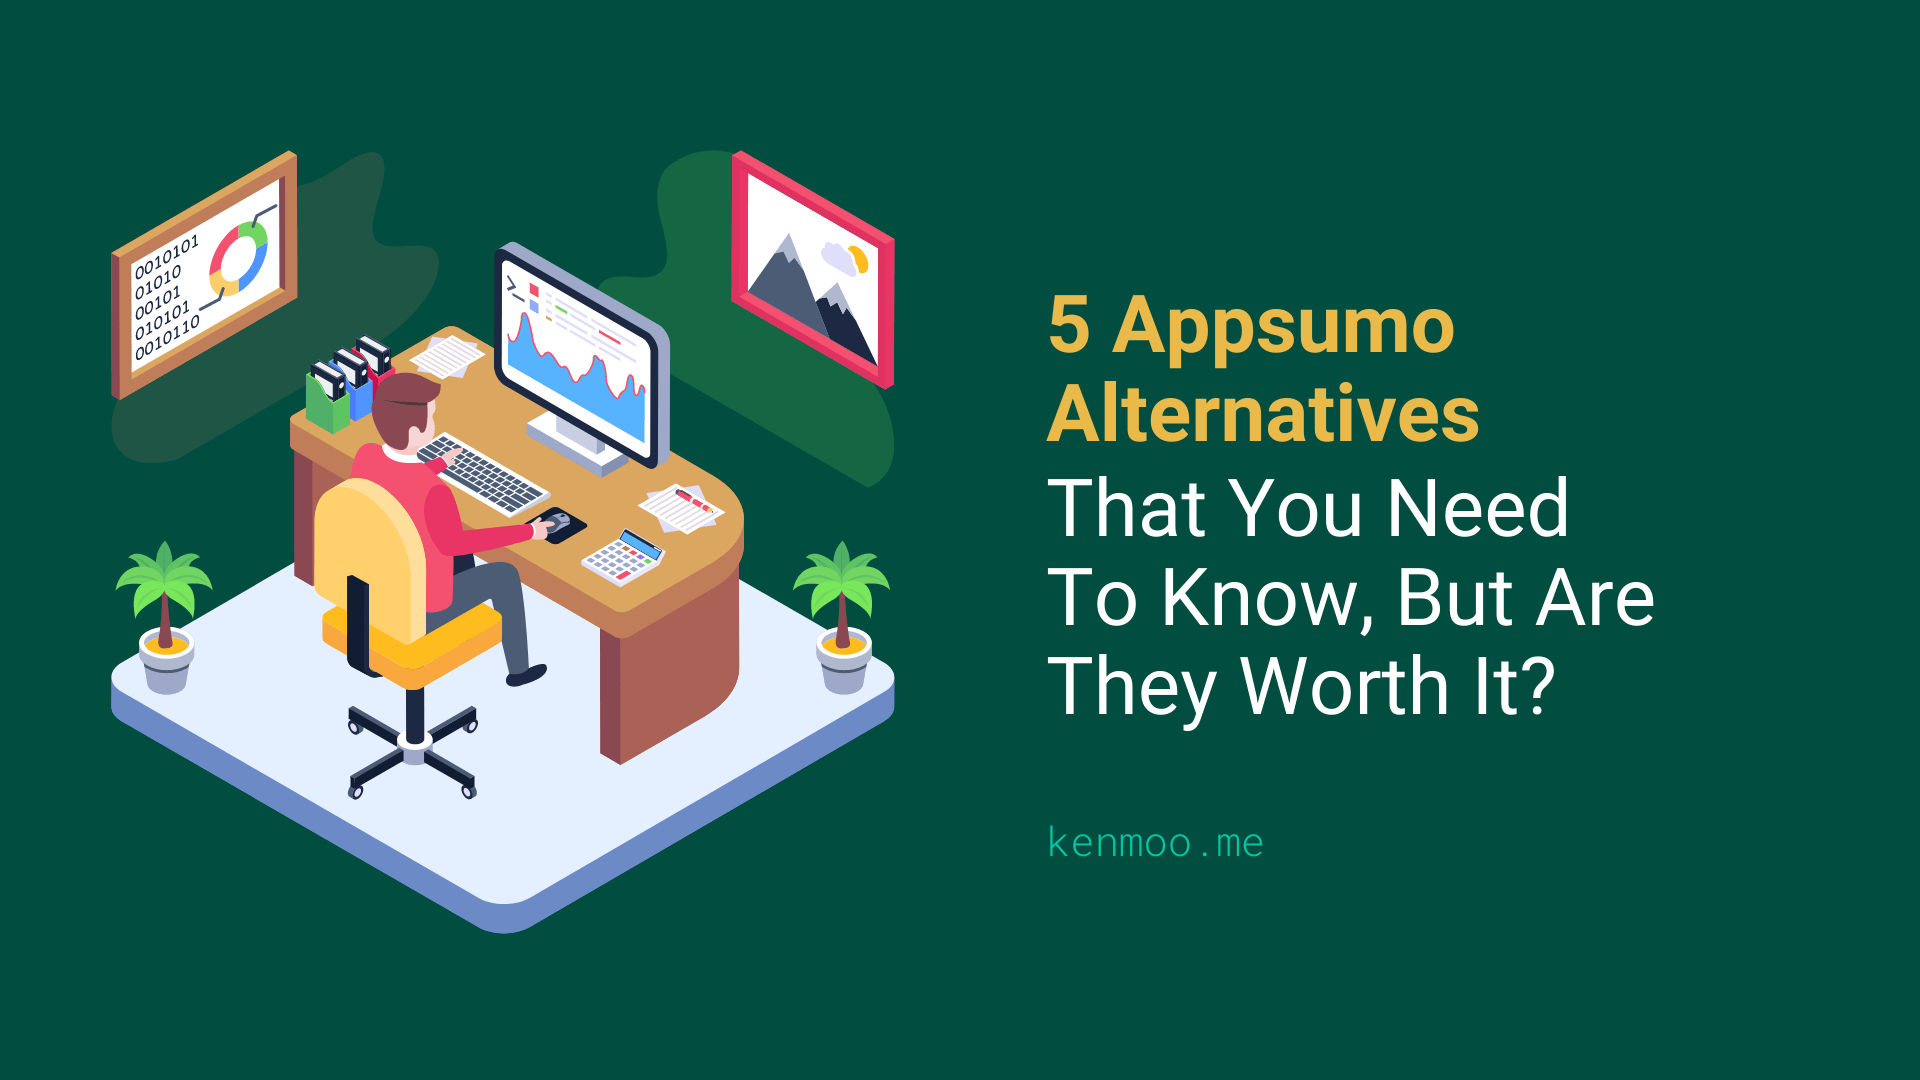 6 Appsumo Alternatives That You Need To Know, But Are They Worth It?